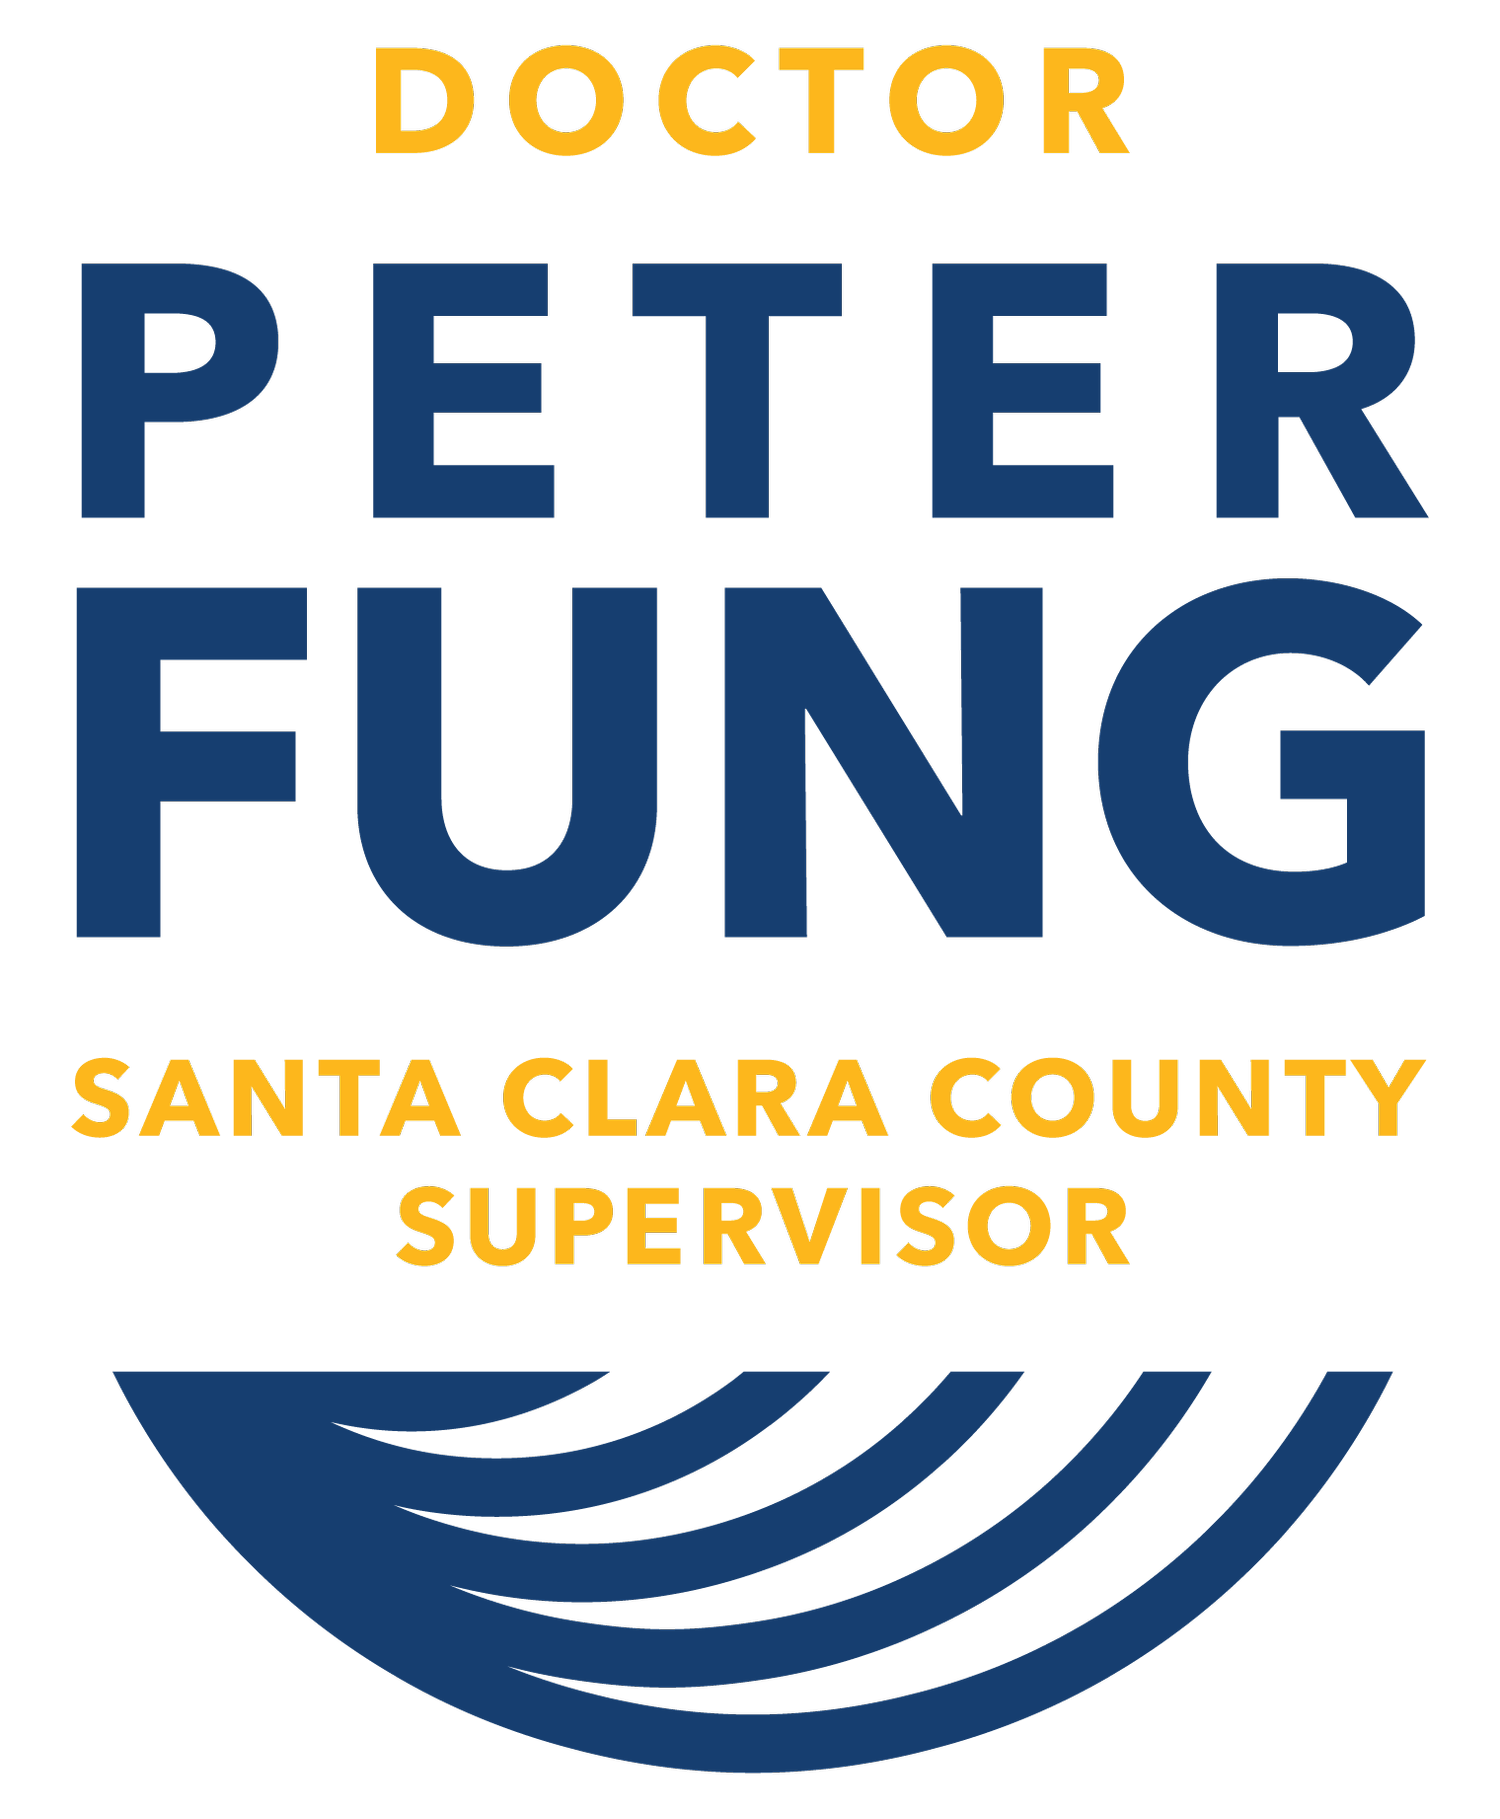 Vote Peter Fung